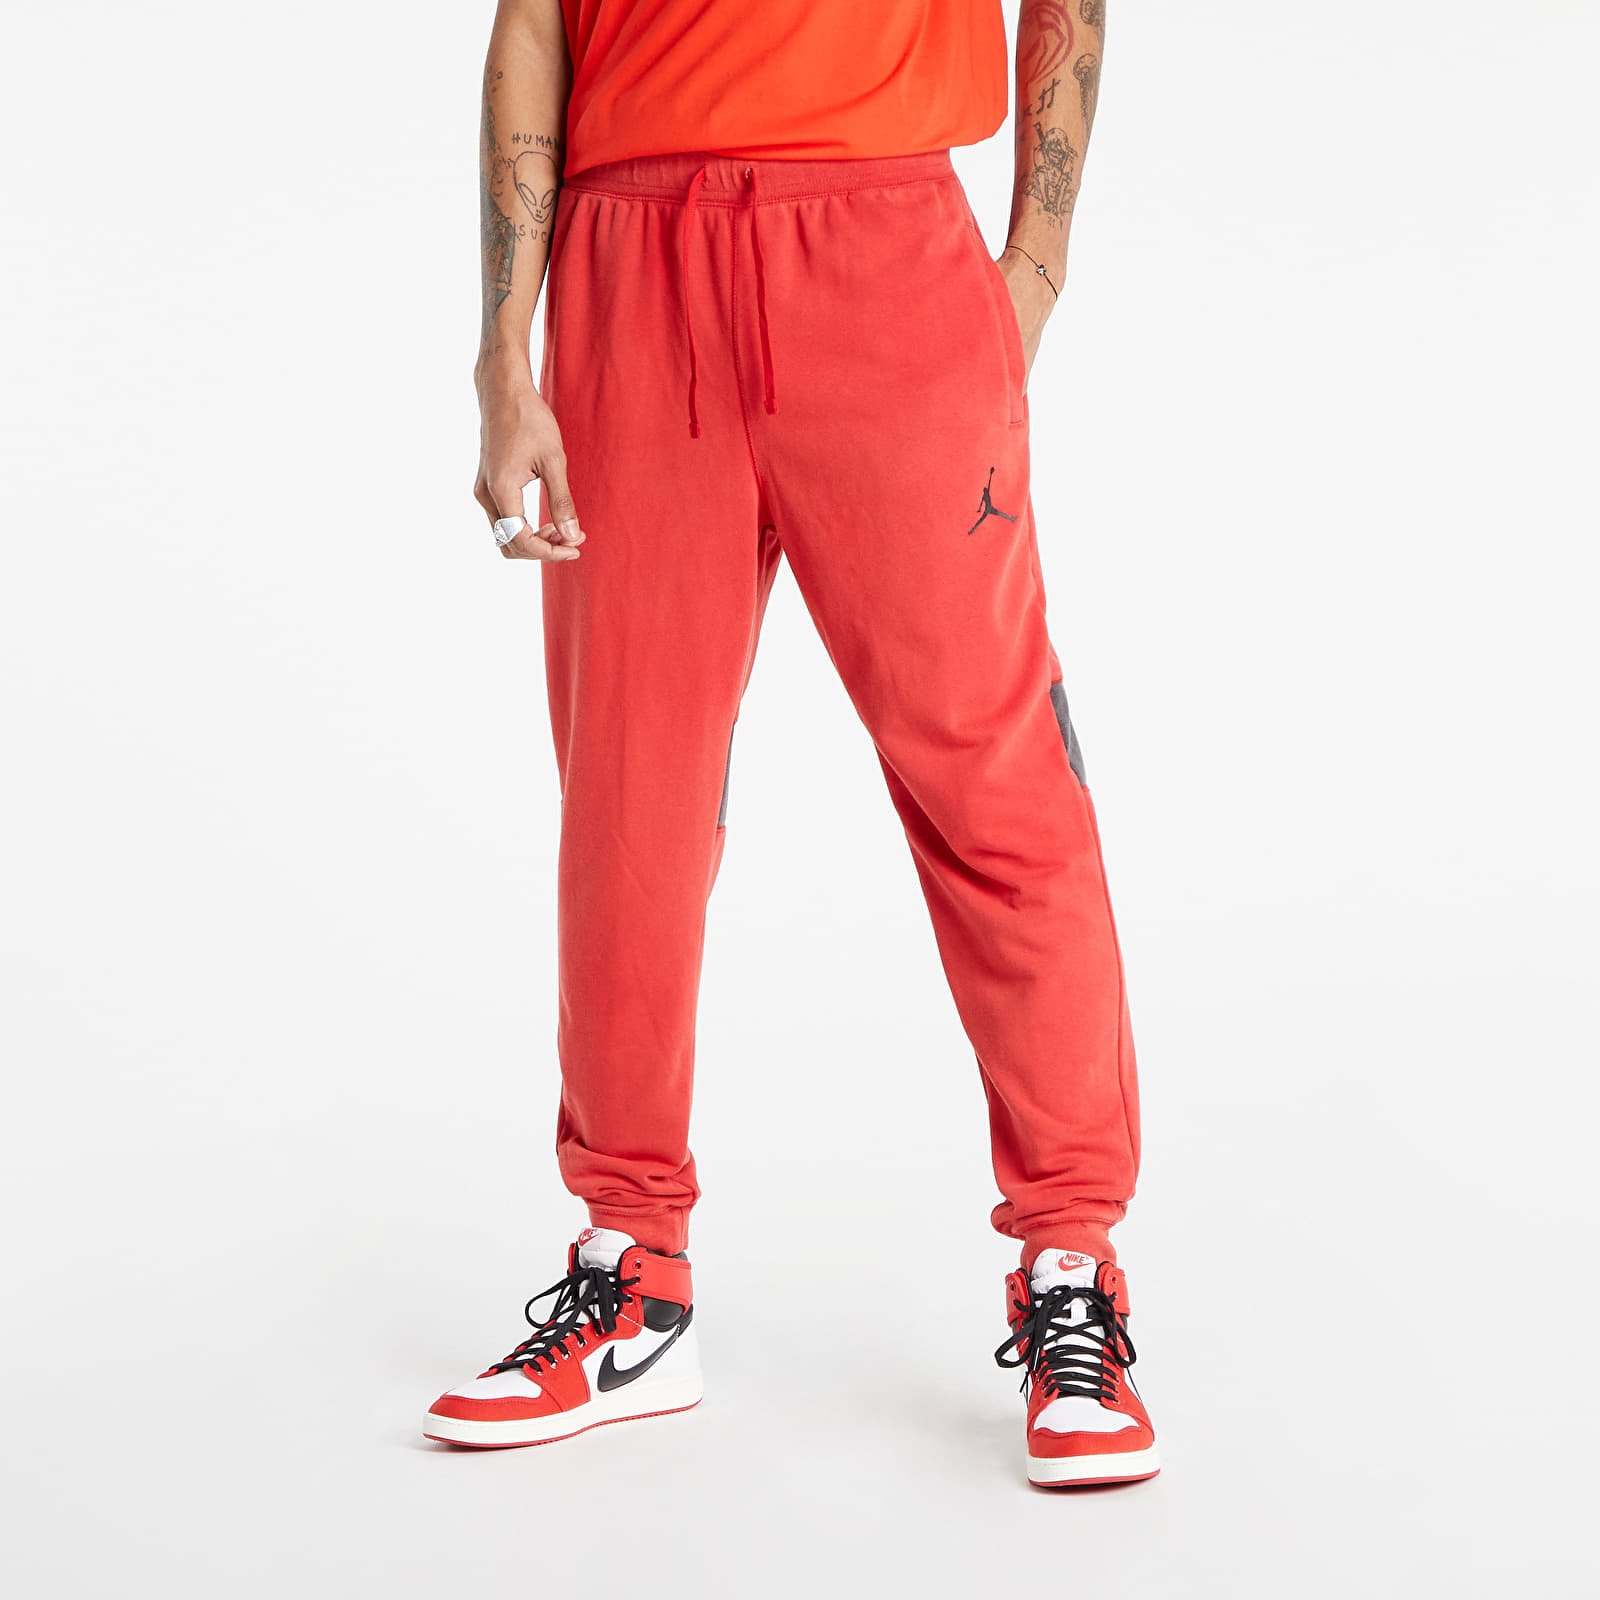 Stay Comfortable and Stylish with Nike Air Jordan Track Pants